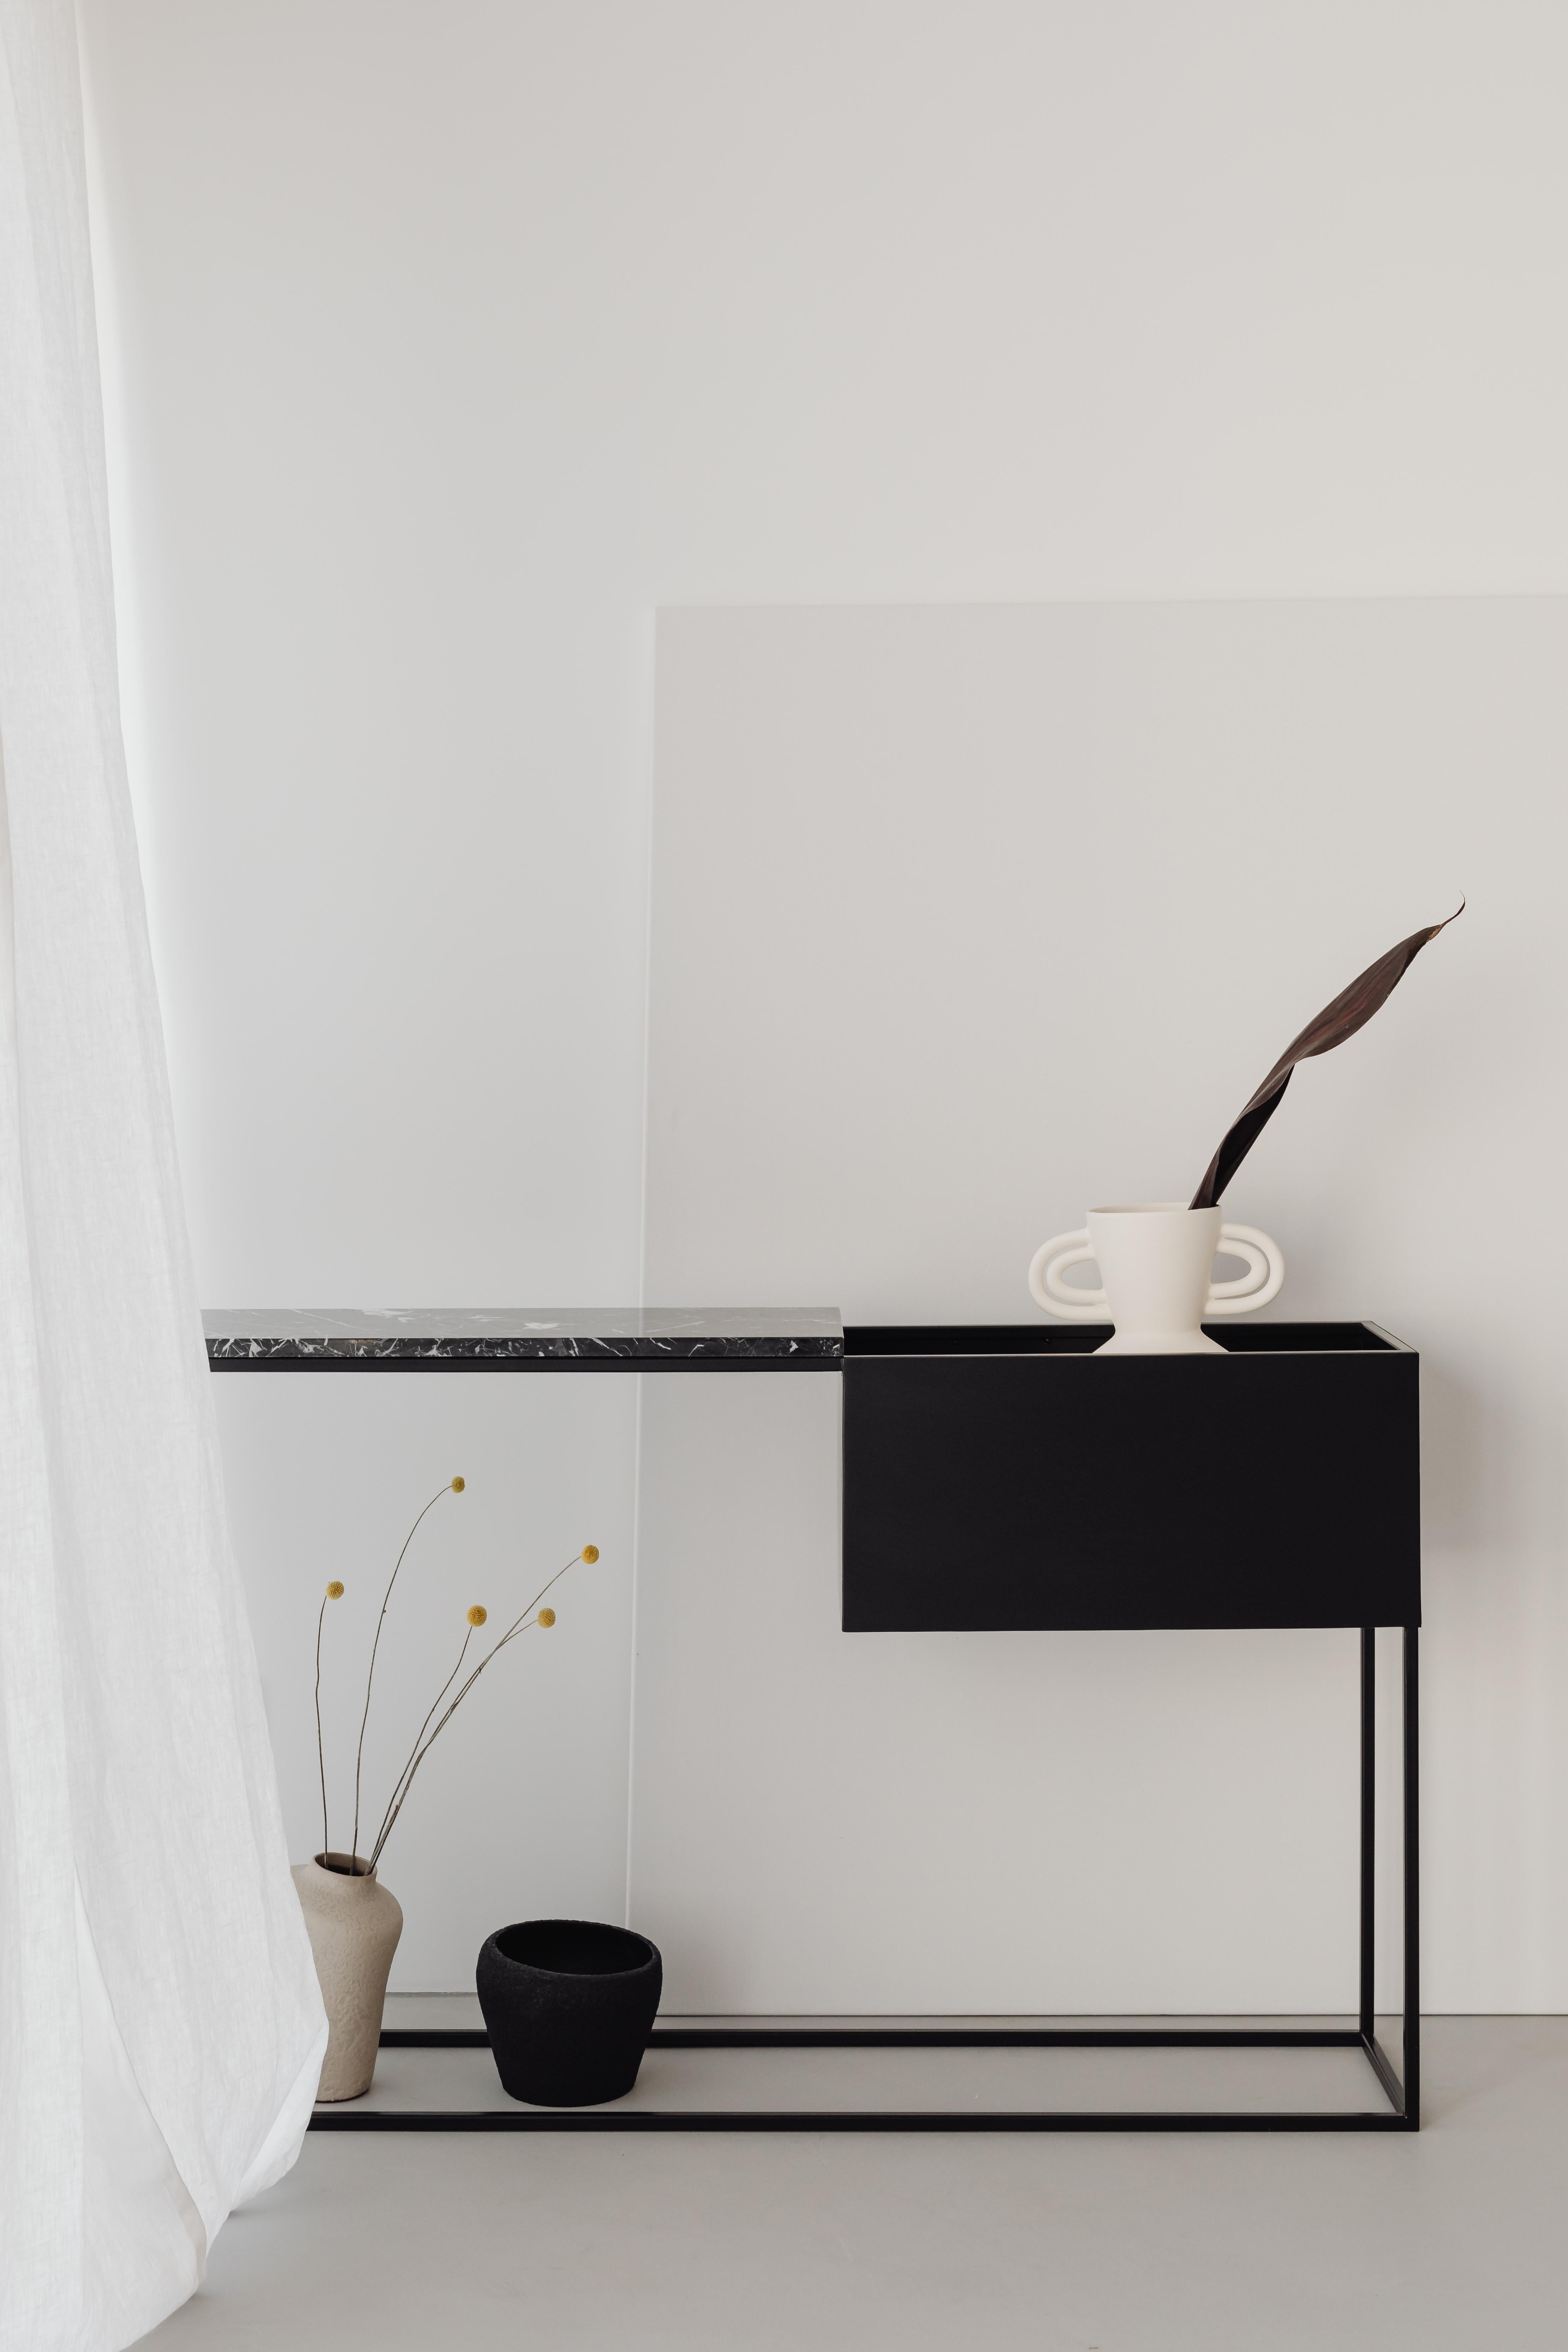 BOX MAXI is a fine example of ingenious modern design. It will be a great choice for your hall, living room or bedroom. It offers a very functional combination of the marble top and lowered shelf – two different, complementary surfaces. The frame